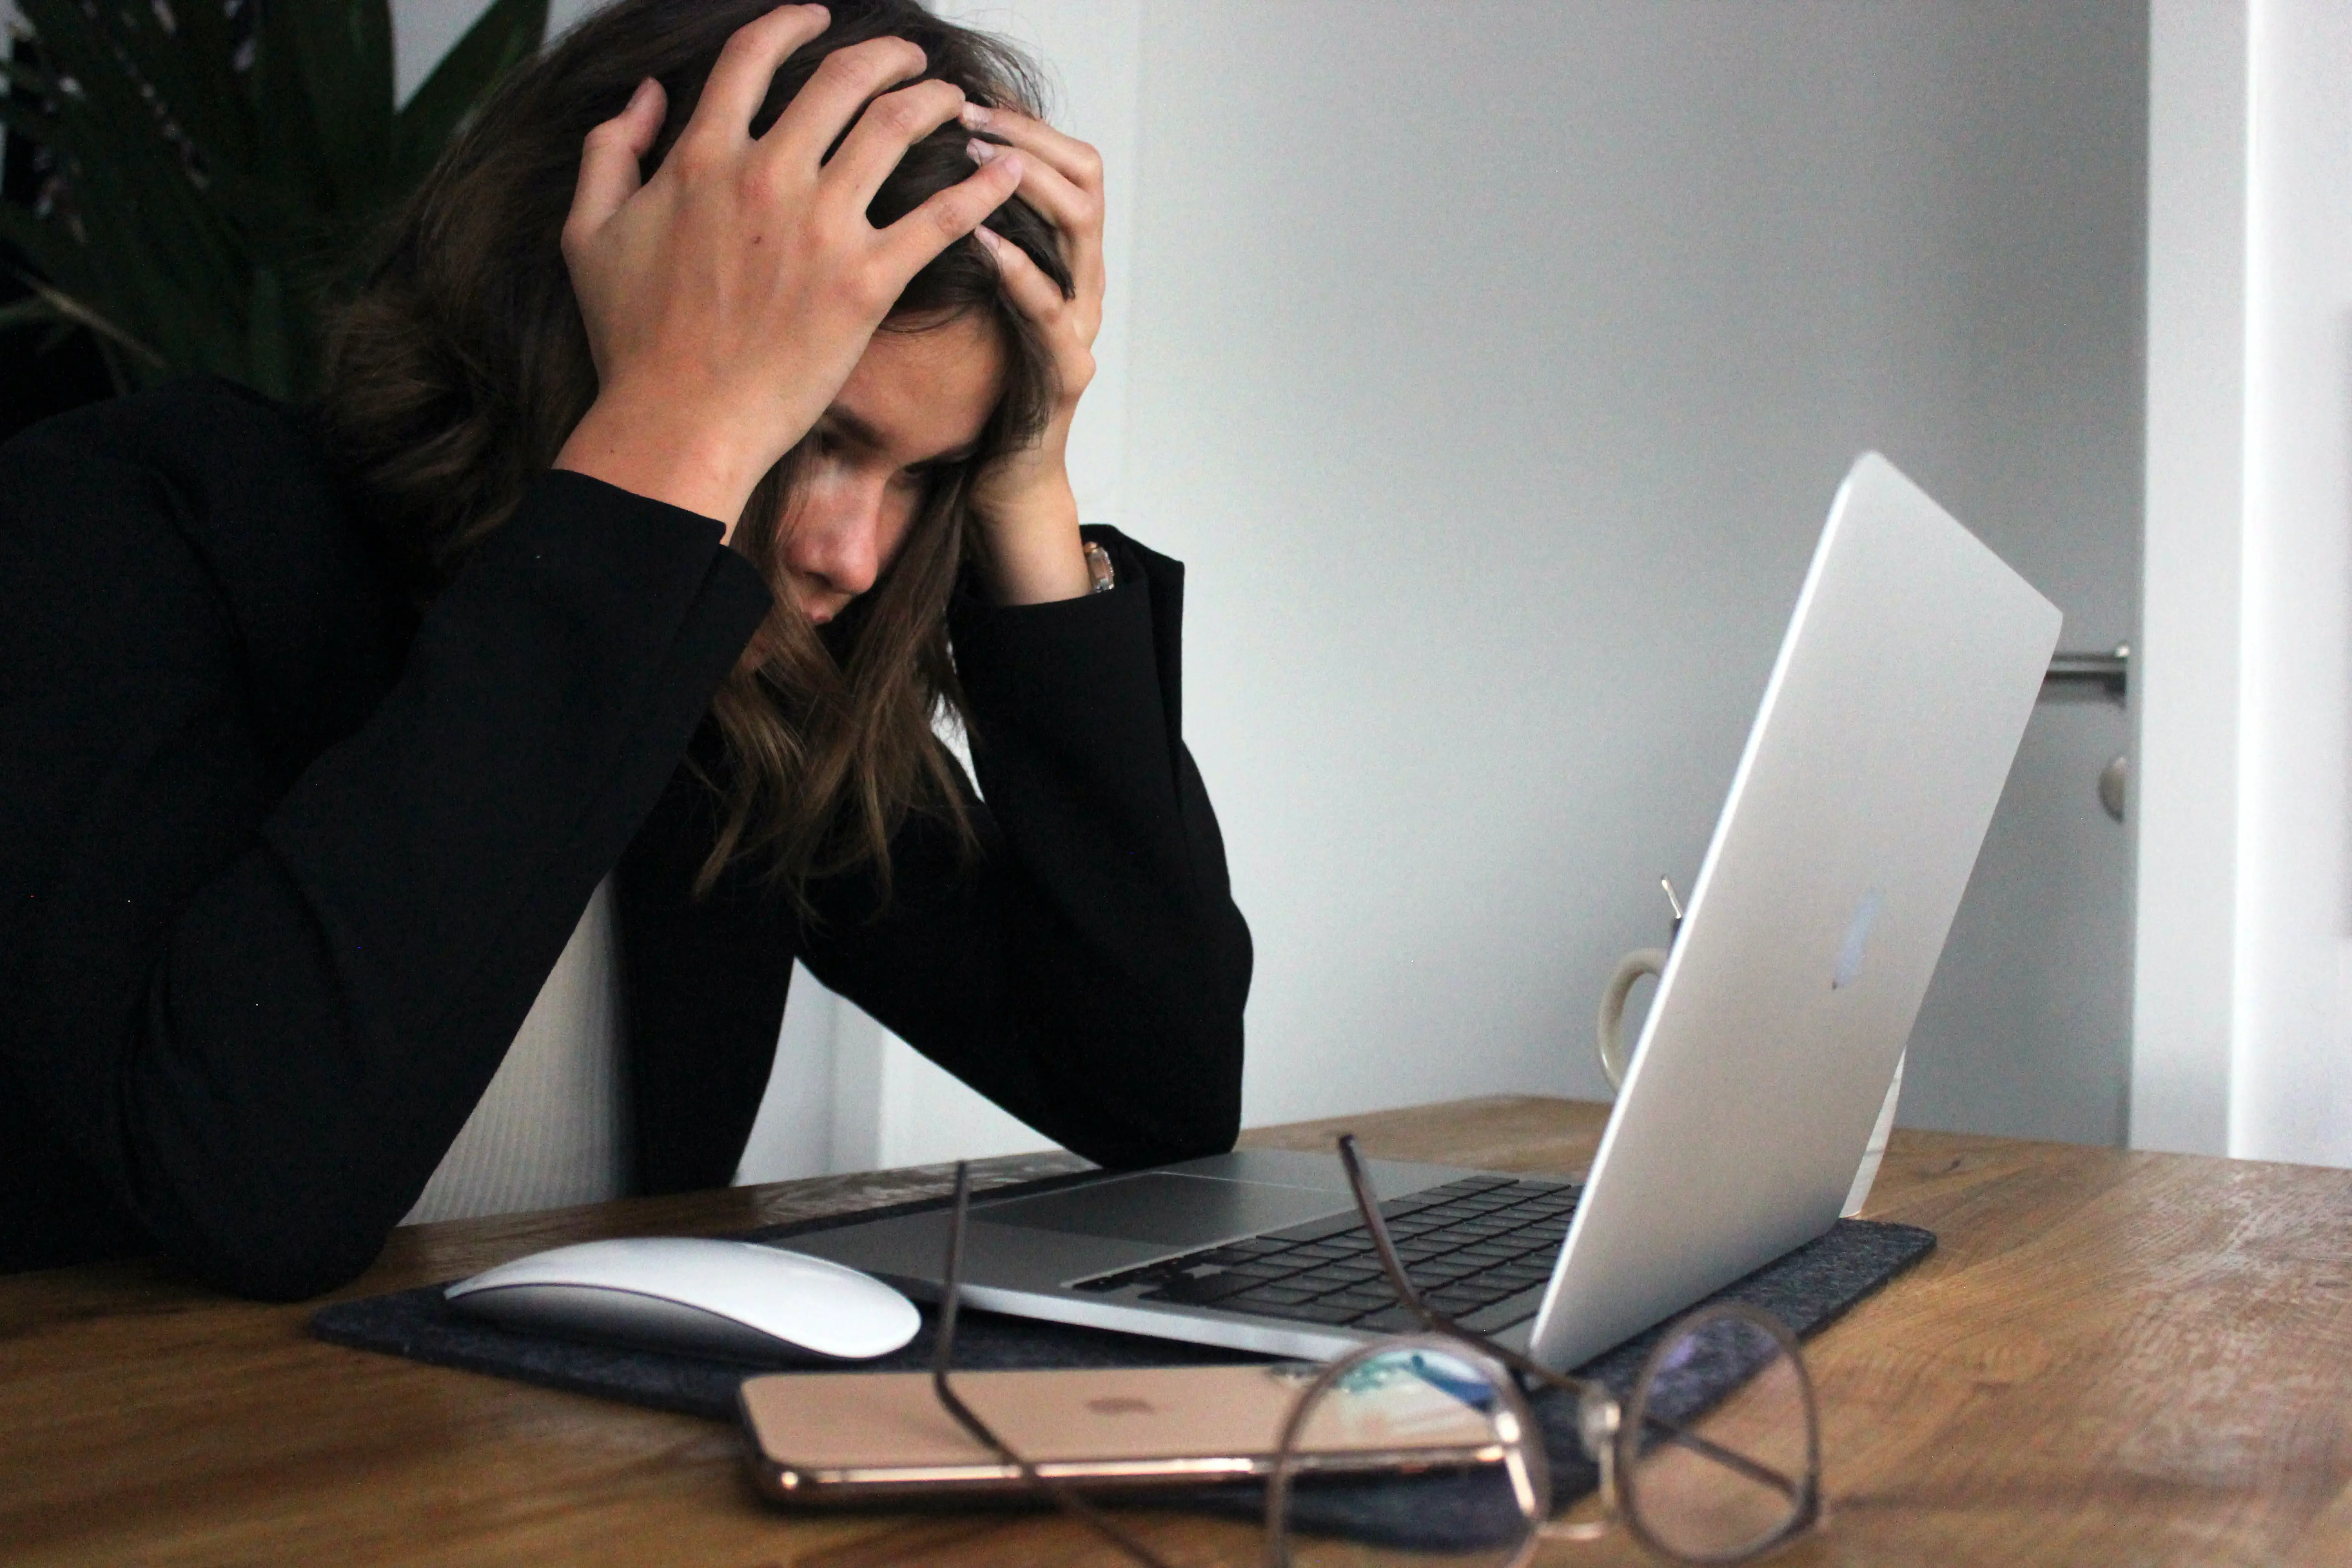 types of entrepreneurial stress - A female entrepreneur held her head in front of her laptop as she appeared stressed